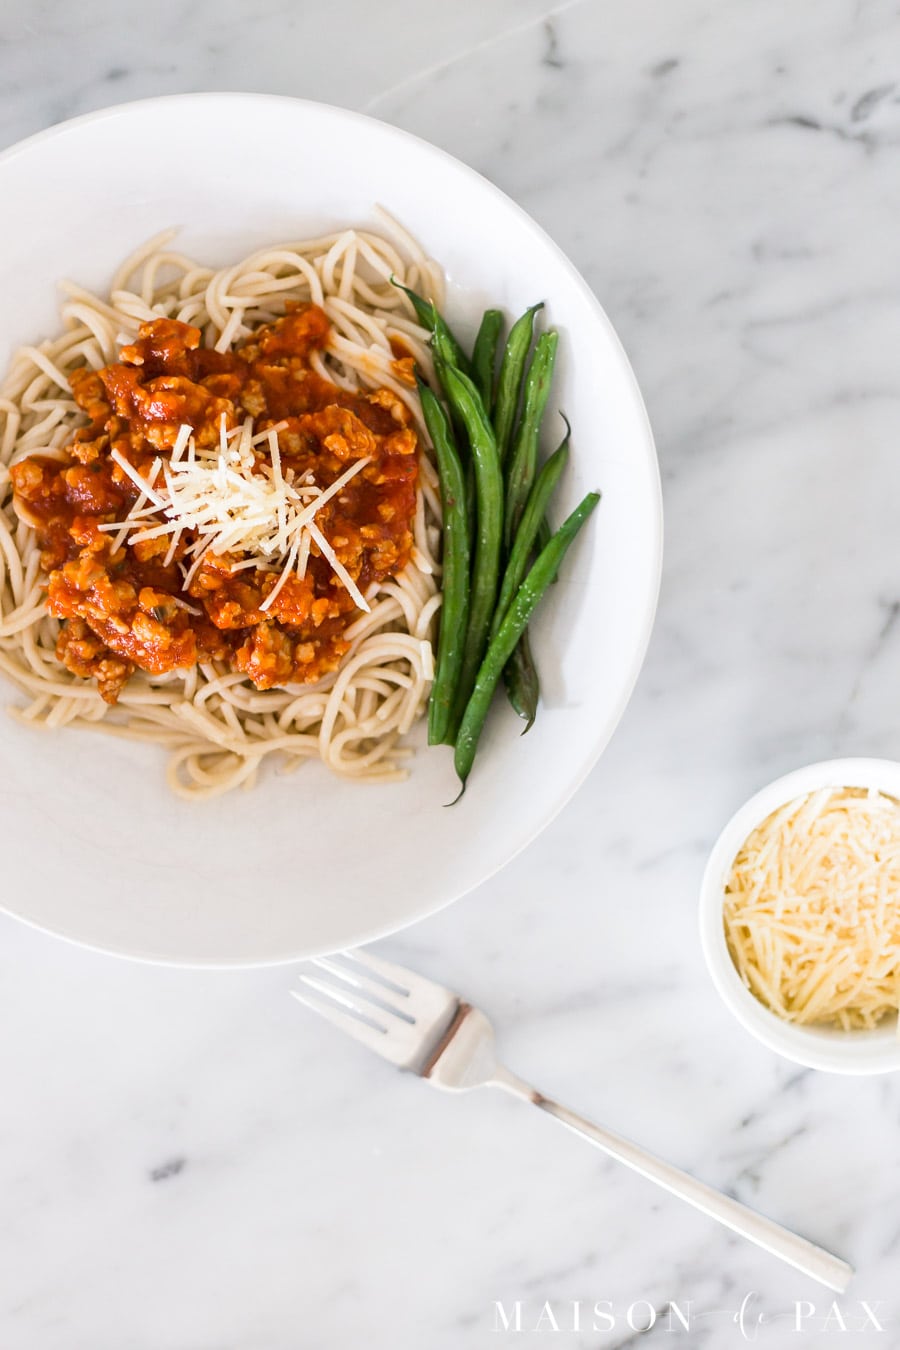 spaghetti and red sauce with italian sausage | Maison de Pax